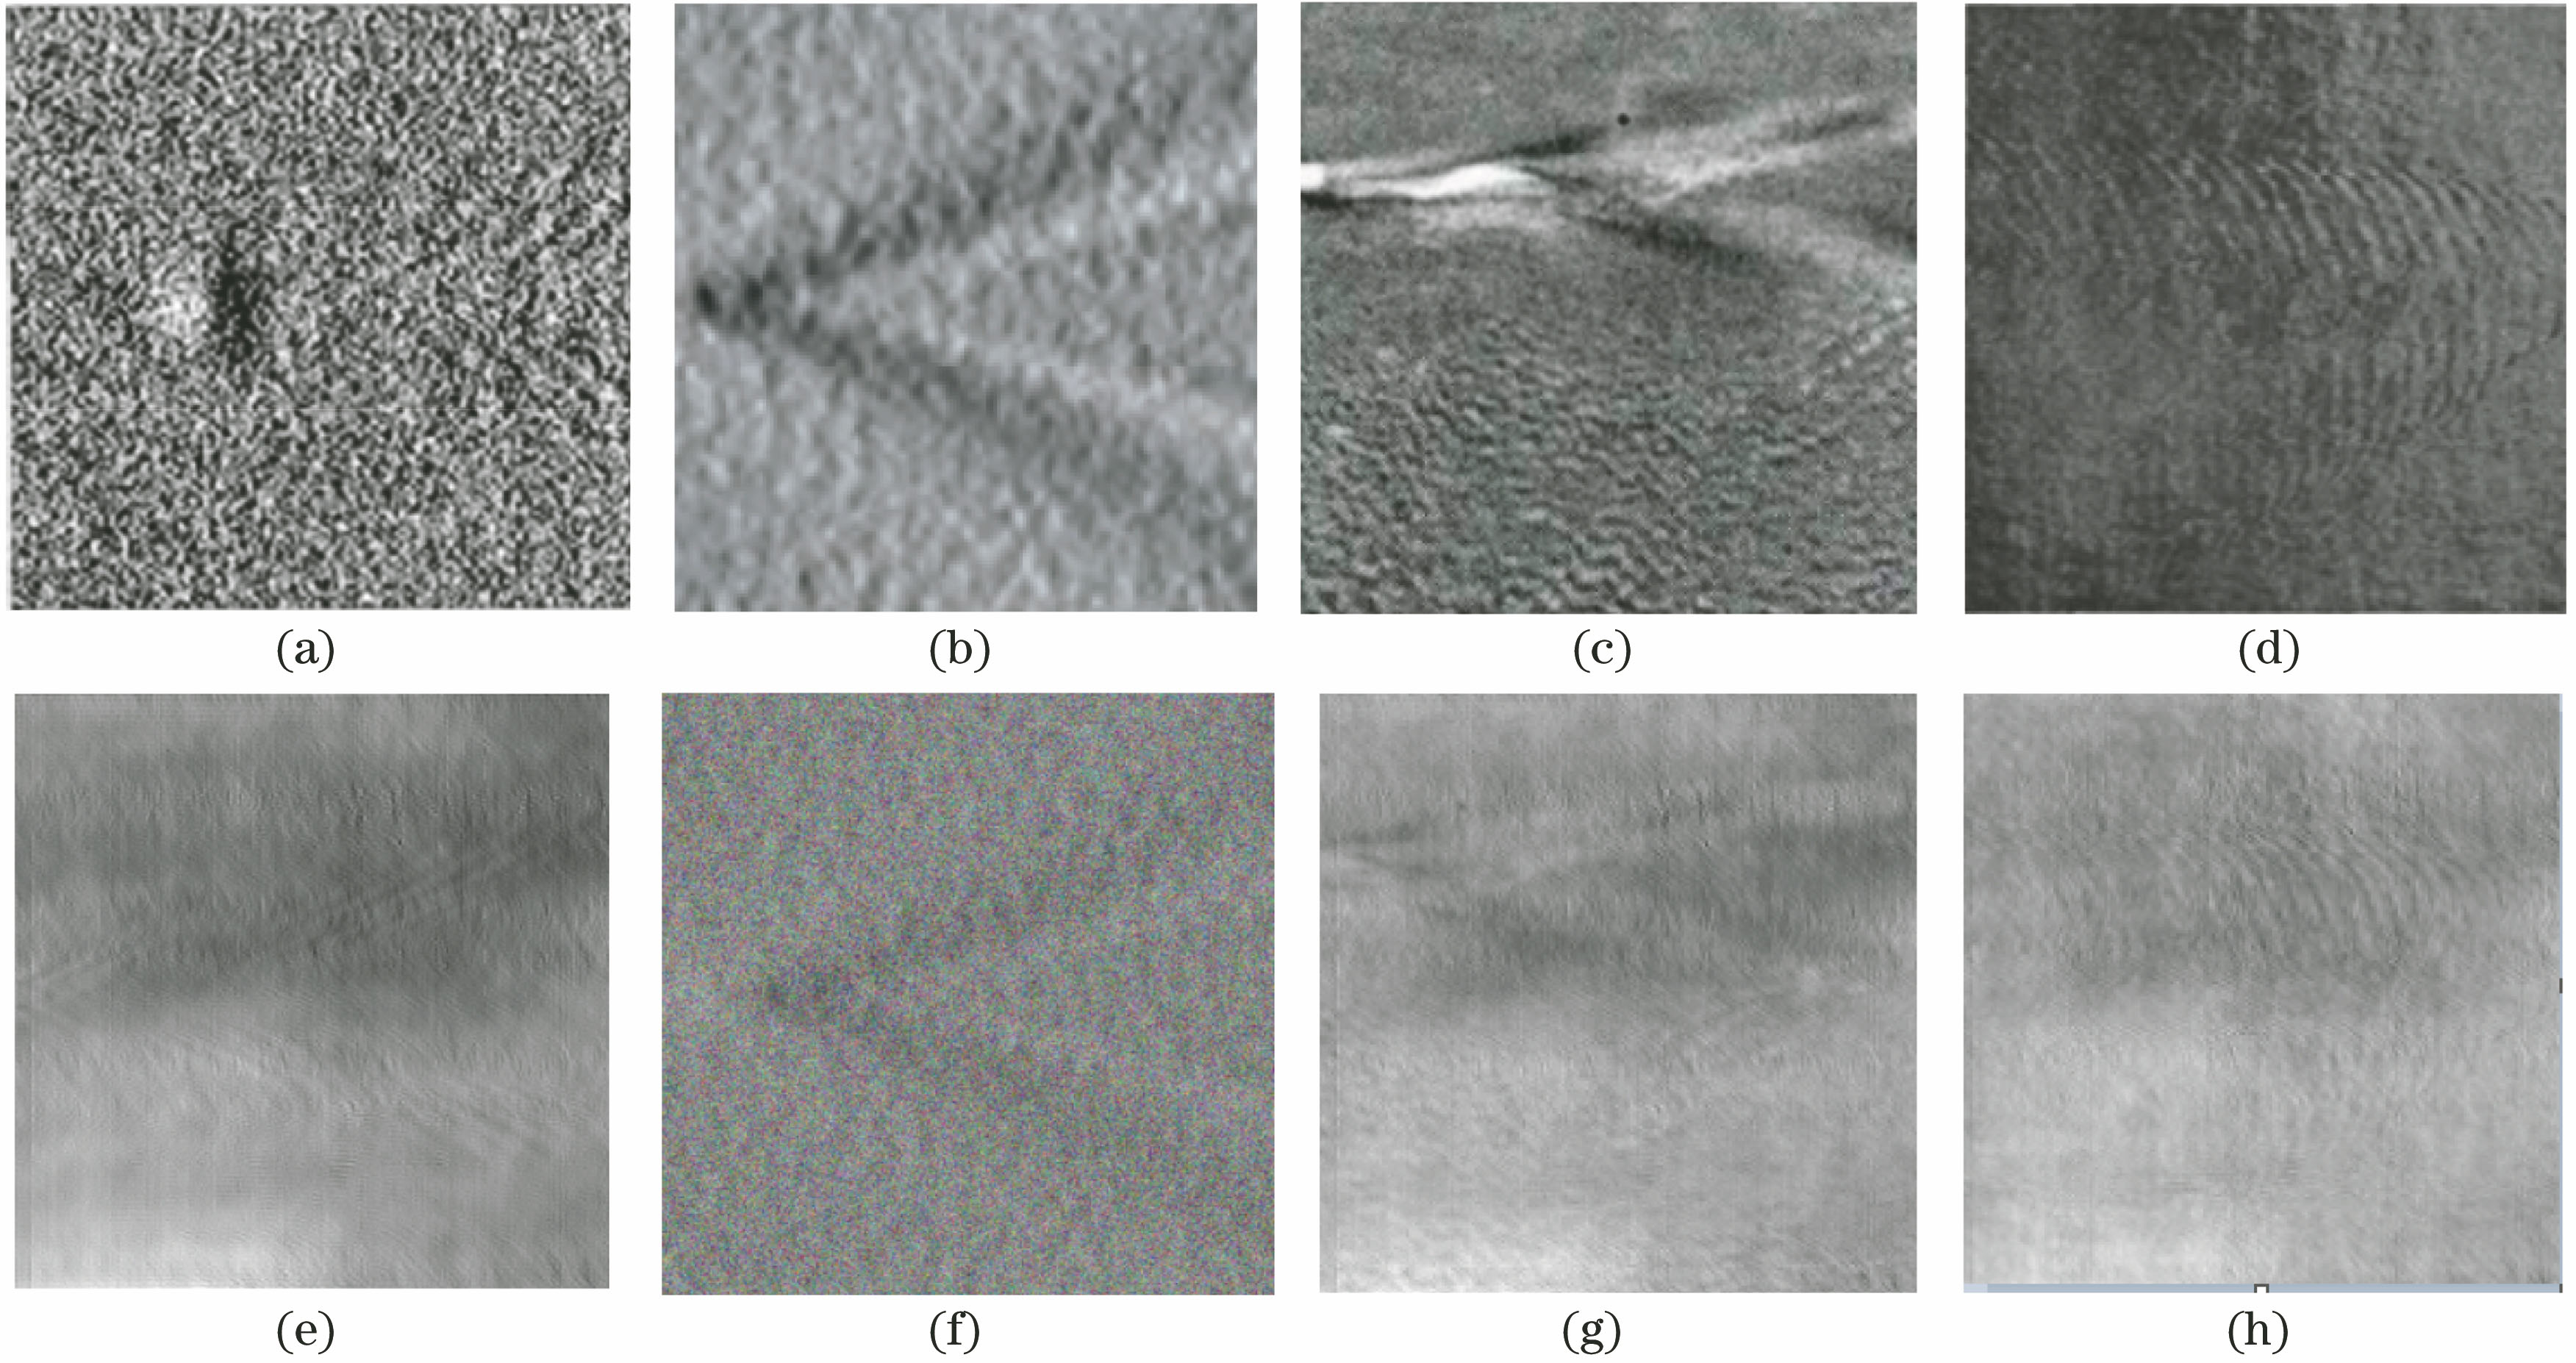 Simulation results of weak texture signal images of submarine's V-wake in direct course. (a) Weak texture image in Ref. [7]; (b) weak texture image in Ref. [8]; (c) weak texture image in Ref. [15]; (d) weak texture image in Ref. [16]; (e) weak texture image in Ref. [7] with background; (f) weak texture image in Ref. [8] with background; (g) weak texture image in Ref. [15] with background; (h) weak texture image in Ref. [16] with background